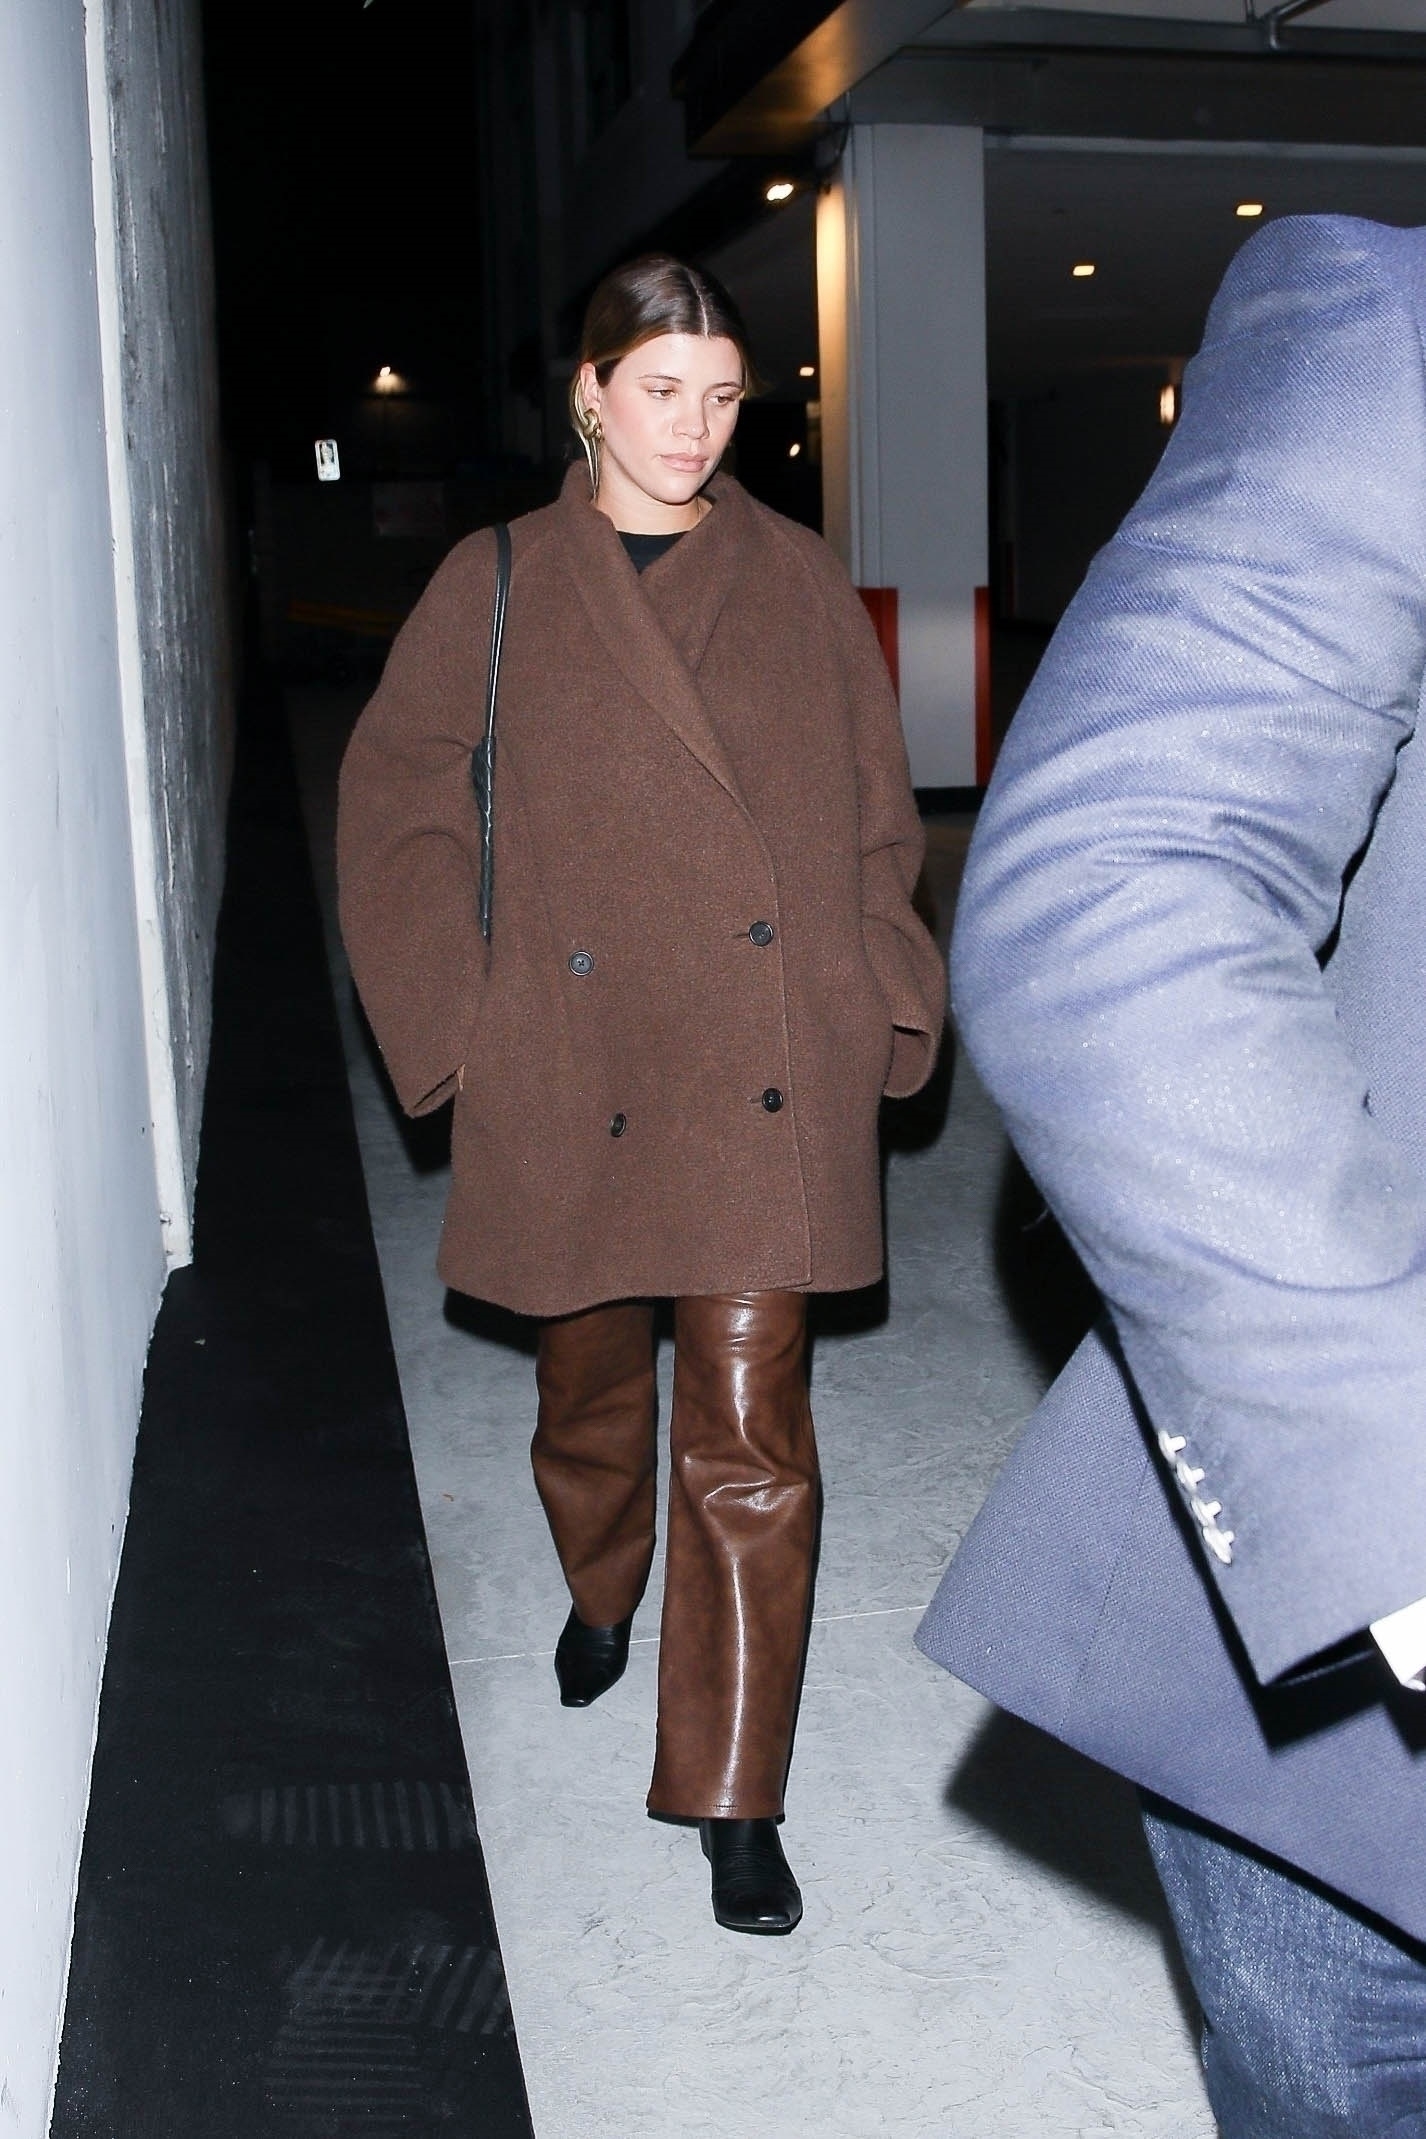 Sofia donned a giant, brown winter coat that covered her entire torso and nearly draped down past her knees